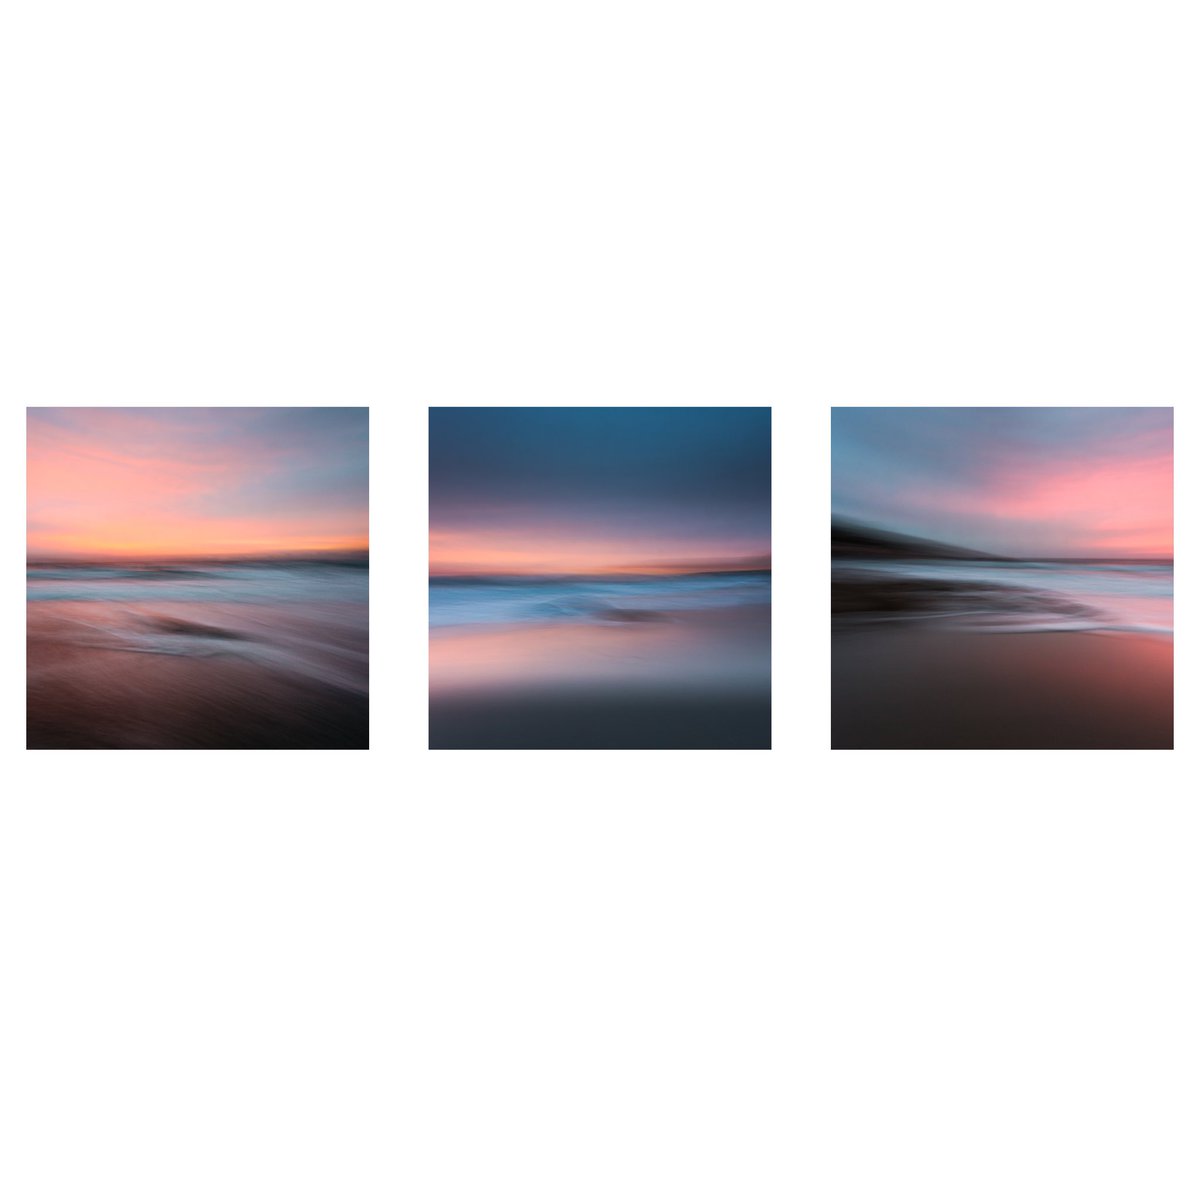 There’s something about a set of three that does it for me!! 🌊🌊 #cornwall #icm #ocean